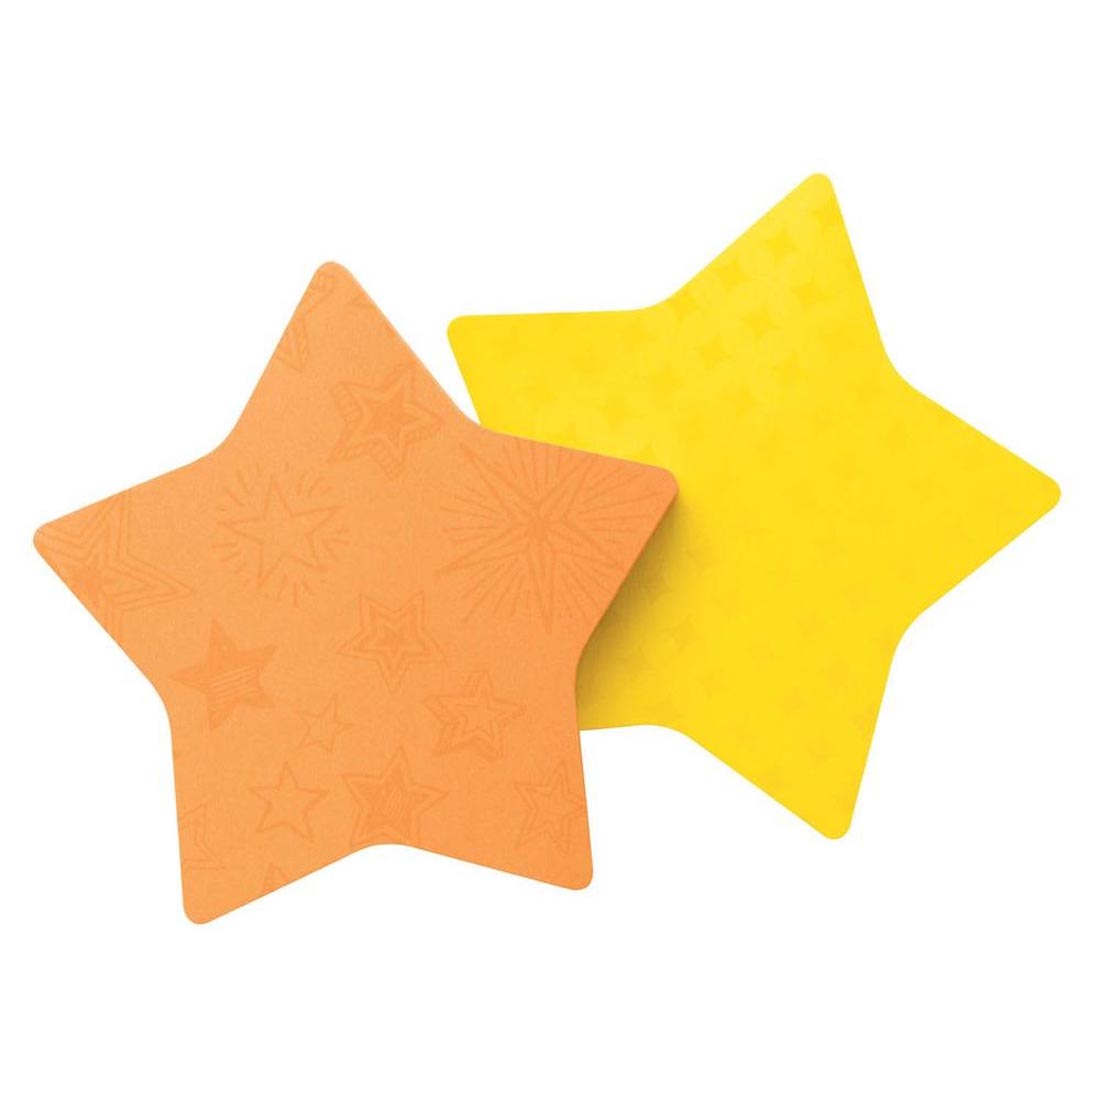 Post-It Super Sticky Star Shaped Notes, 2-count package, assorted colors